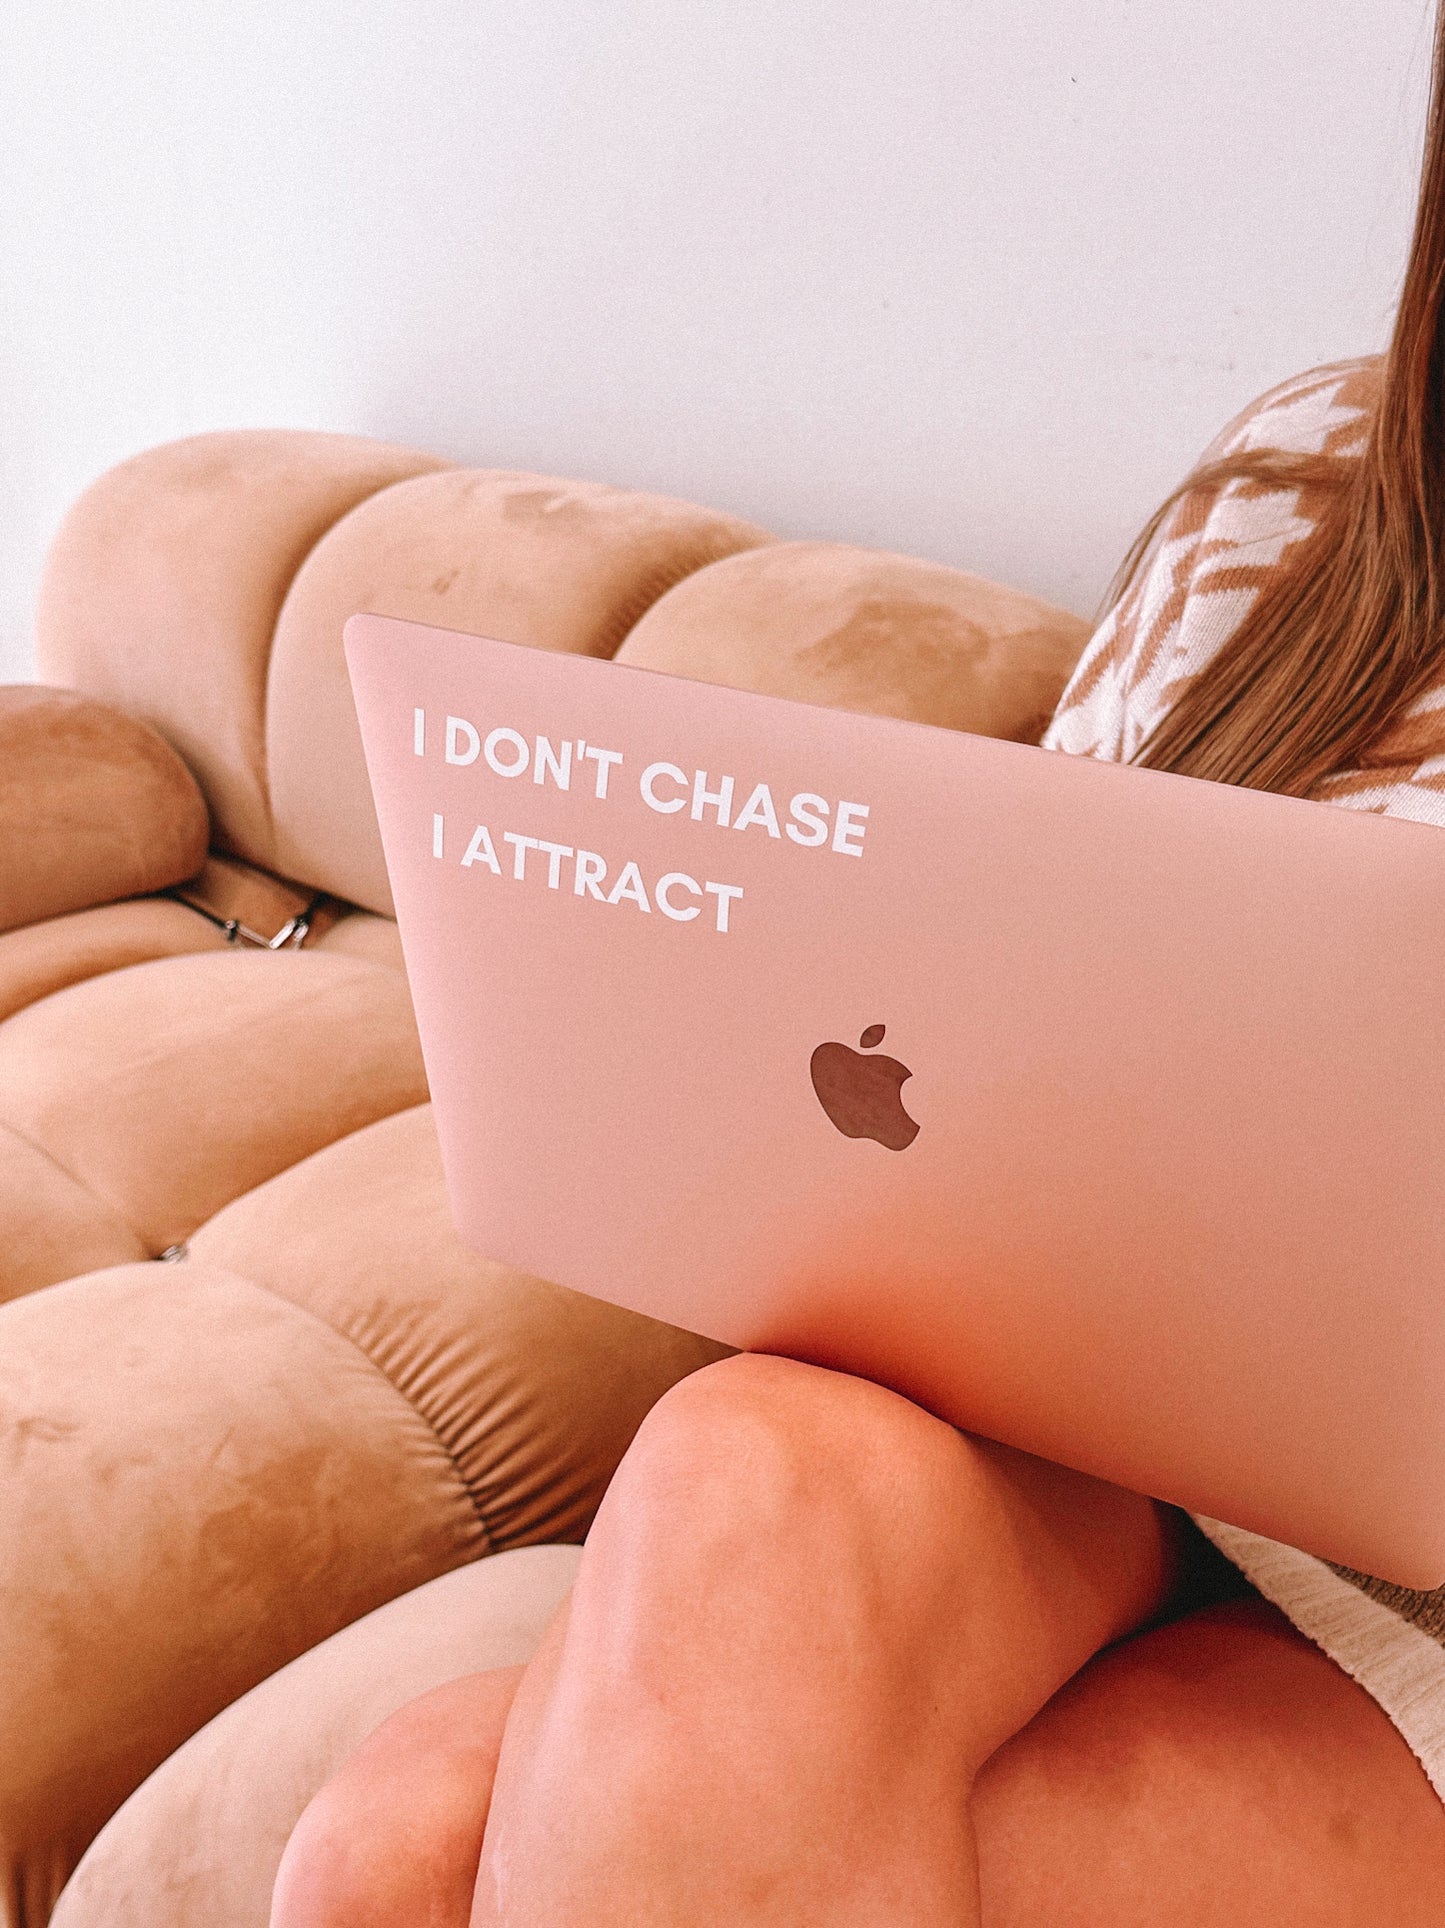 I don't chase, I attract - Decal